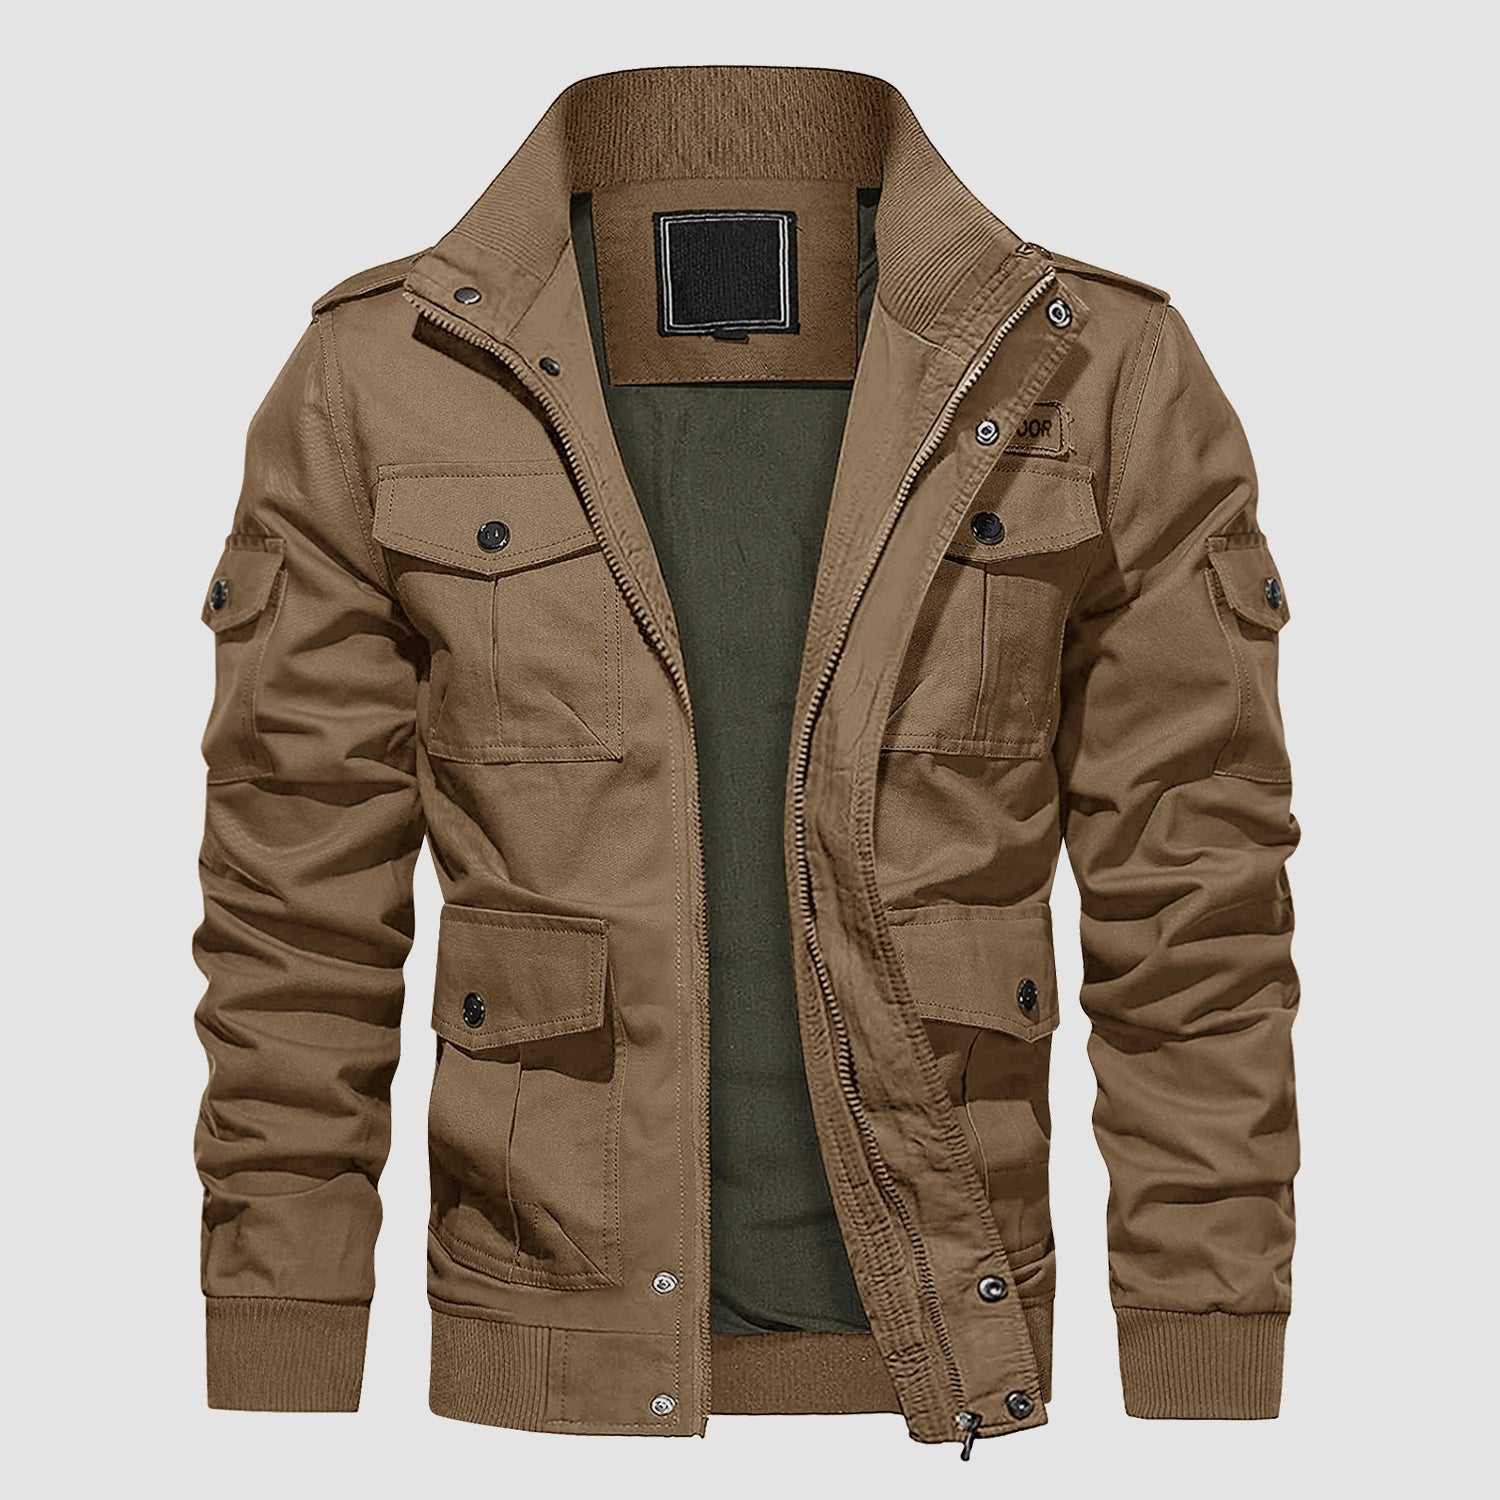 Men's Casual Jacket Coat Cotton Lightweight Fall Jackets Tactical Cargo Jackets Stand Collar